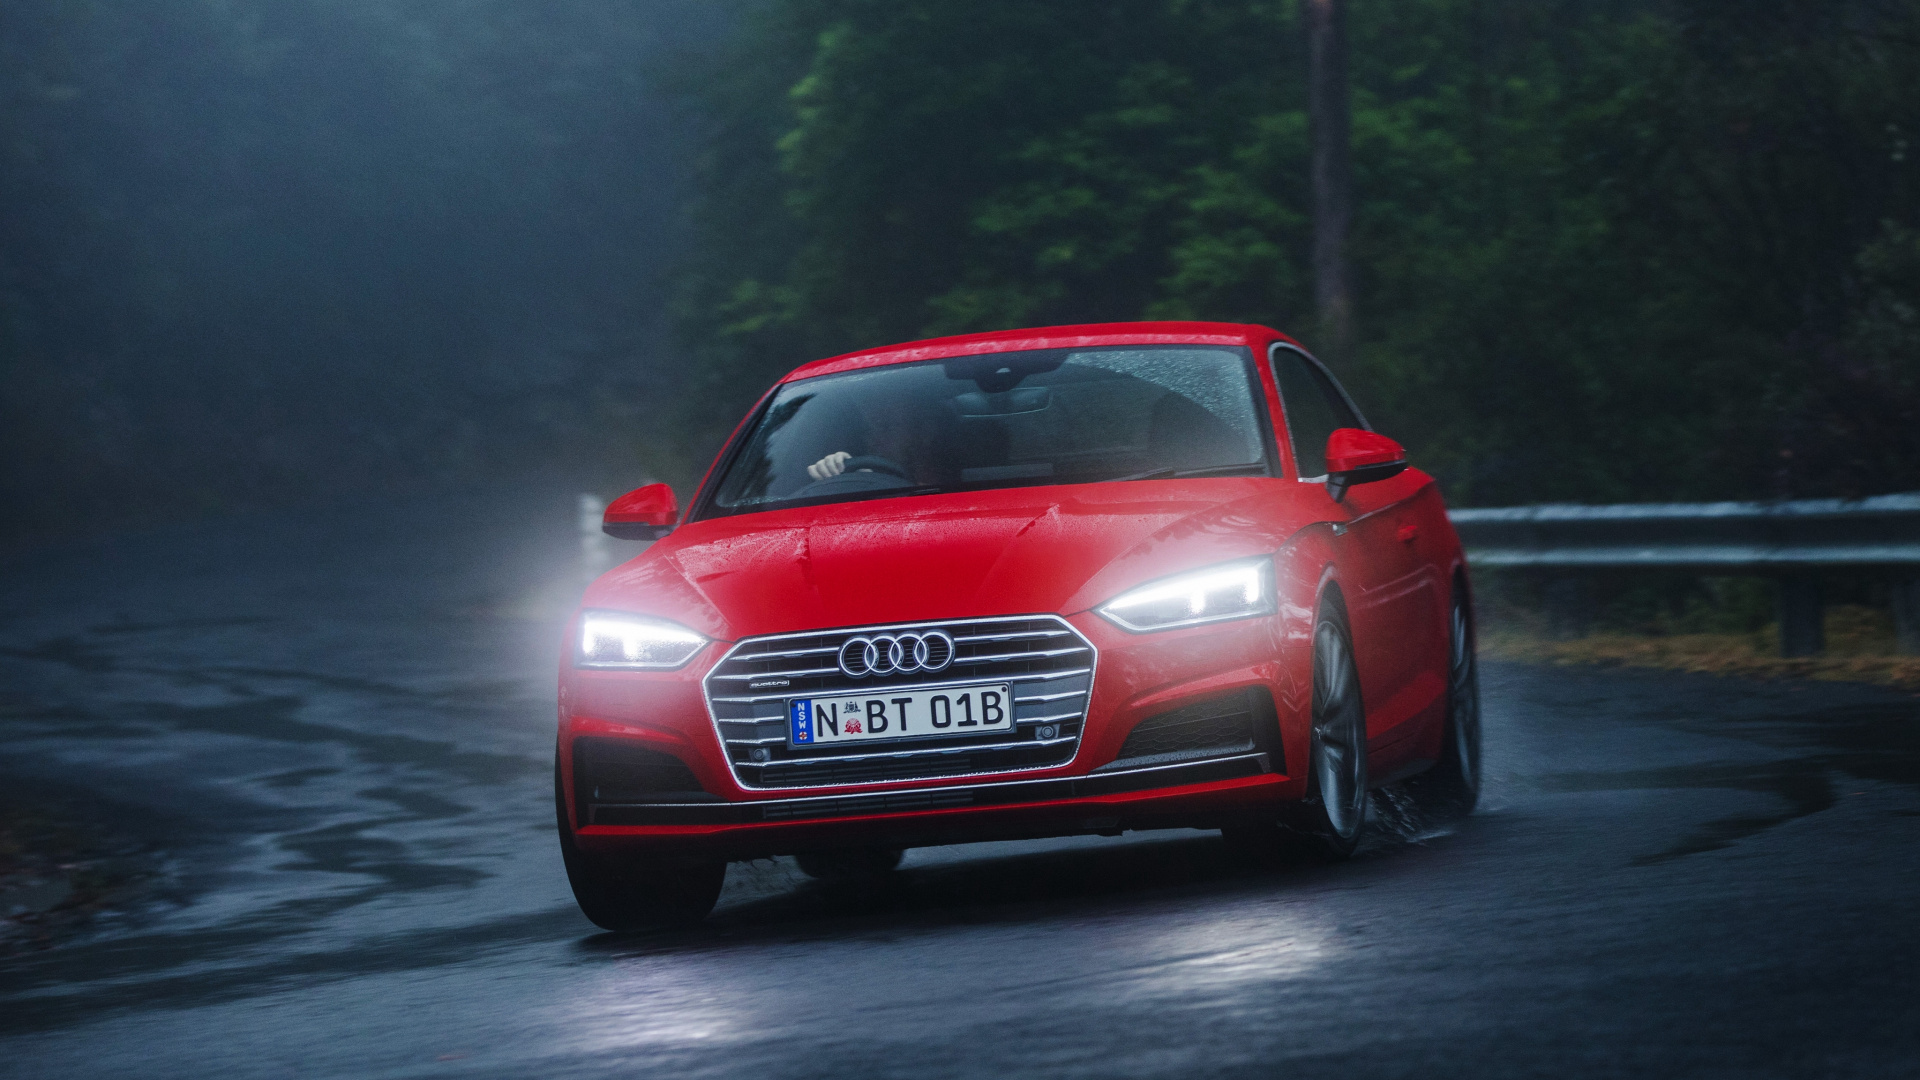 Audi Rouge a 4 Sur Route. Wallpaper in 1920x1080 Resolution